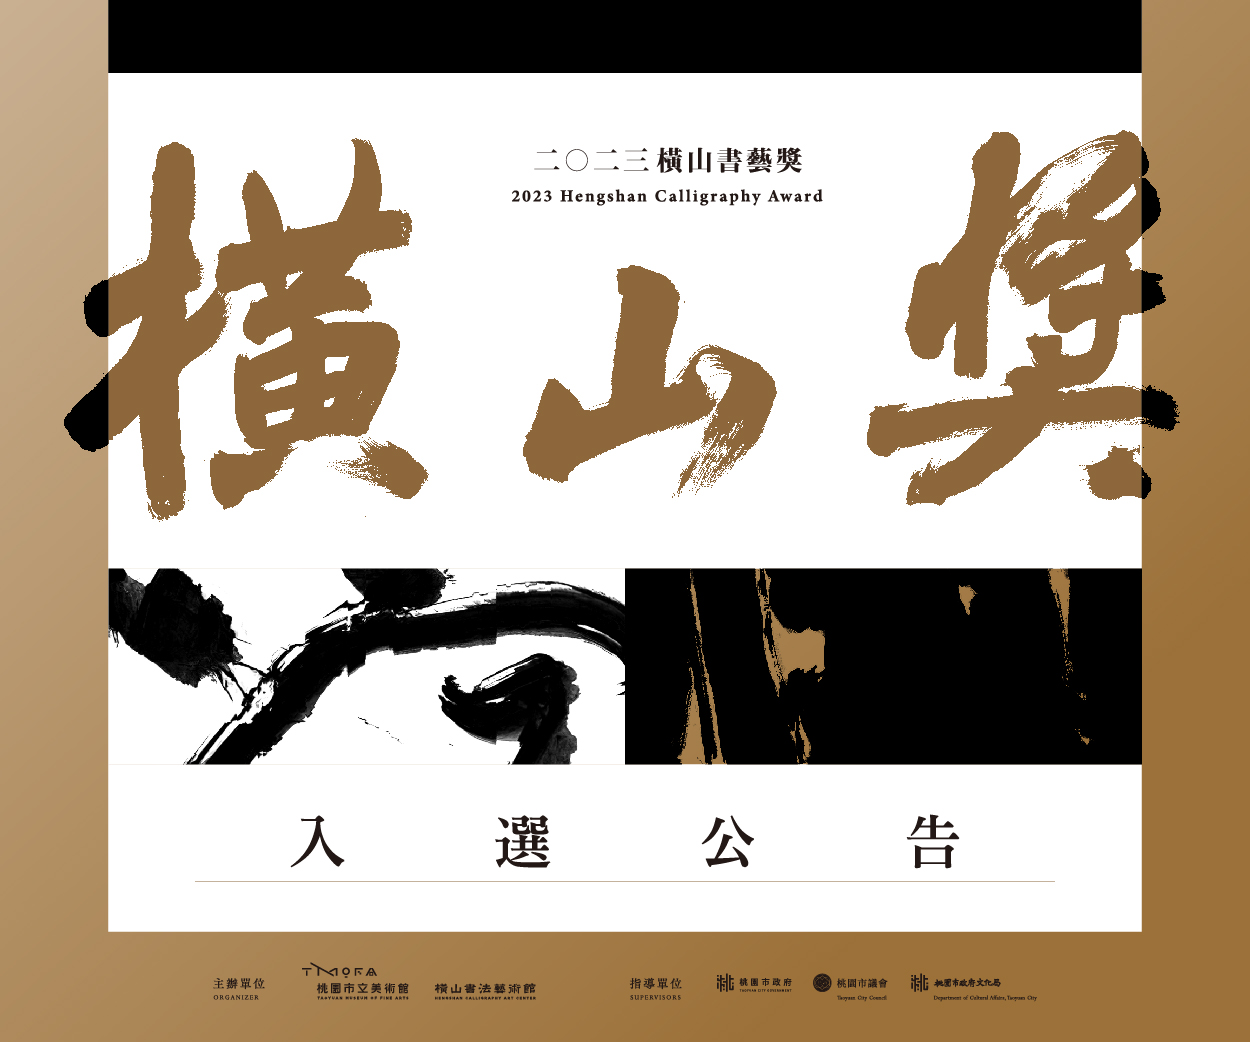 2023 Hengshan Calligraphy Award Announcement of the Shortlist